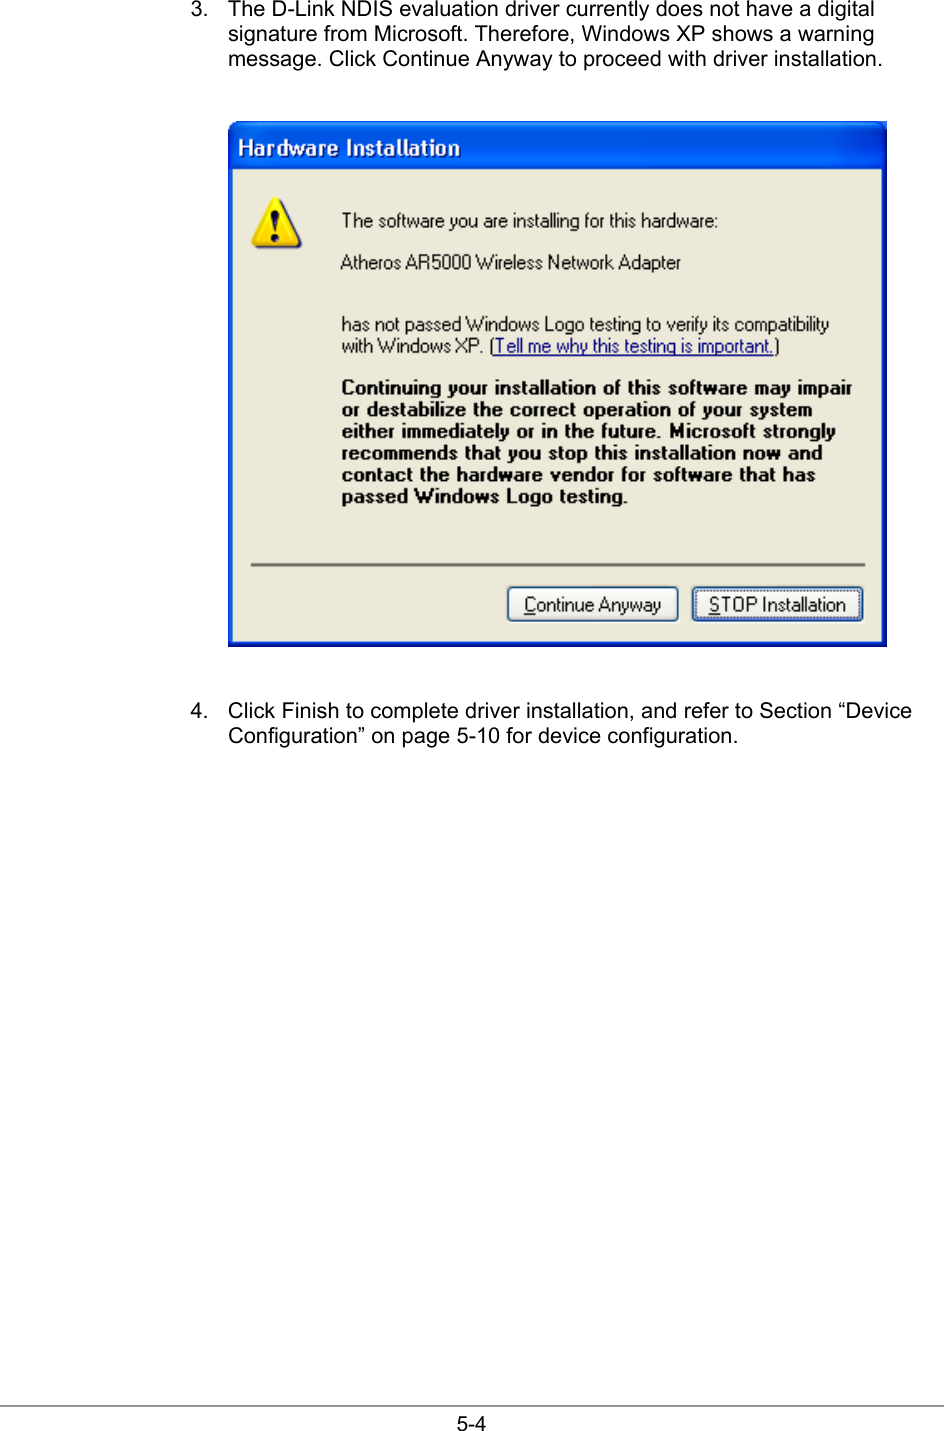  5-4 3.  The D-Link NDIS evaluation driver currently does not have a digital signature from Microsoft. Therefore, Windows XP shows a warning message. Click Continue Anyway to proceed with driver installation.   4.  Click Finish to complete driver installation, and refer to Section “Device Configuration” on page 5-10 for device configuration.  